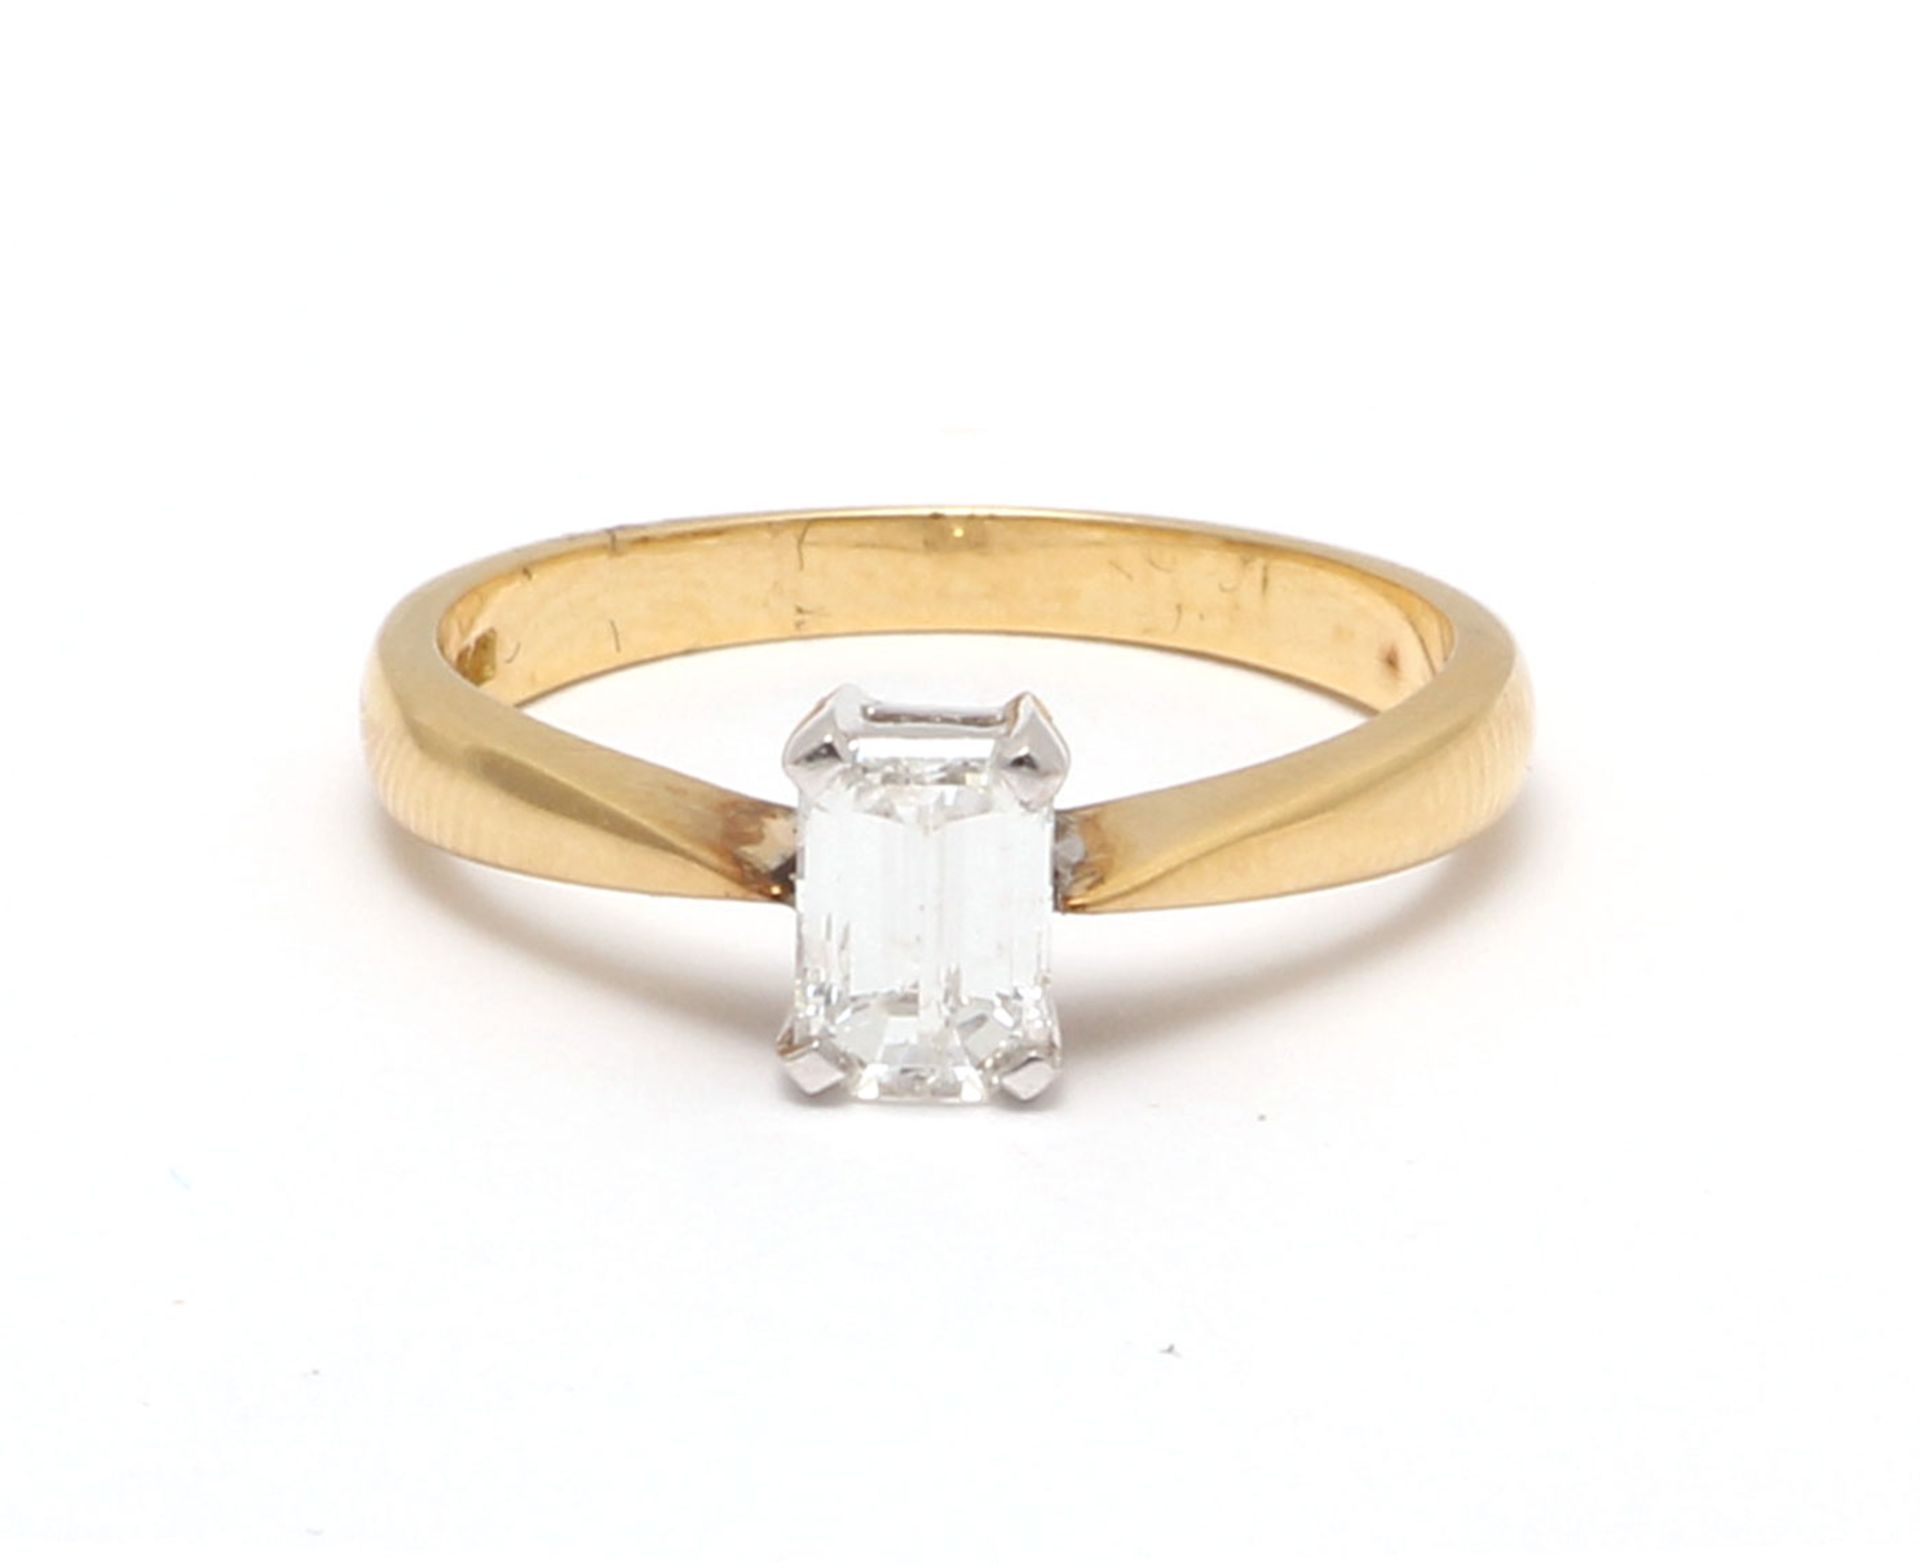 18ct Single Stone Emerald Cut Diamond Ring D SI3 0.72 Carats - Valued by GIE £11,495.00 - A stunning - Image 5 of 9